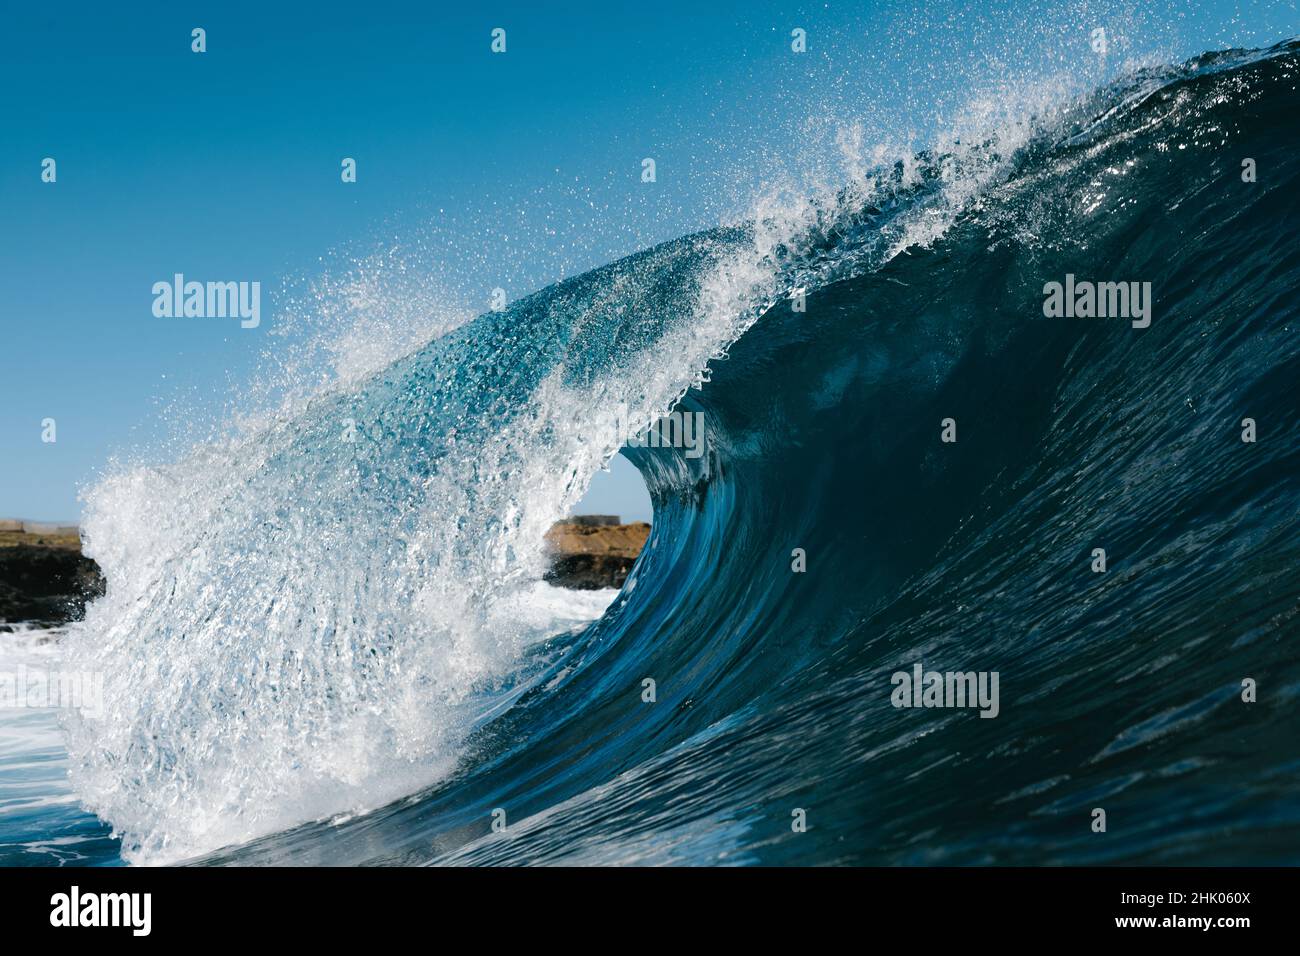 Blue wave breaking on a surfing beach in Canary Islands Stock Photo